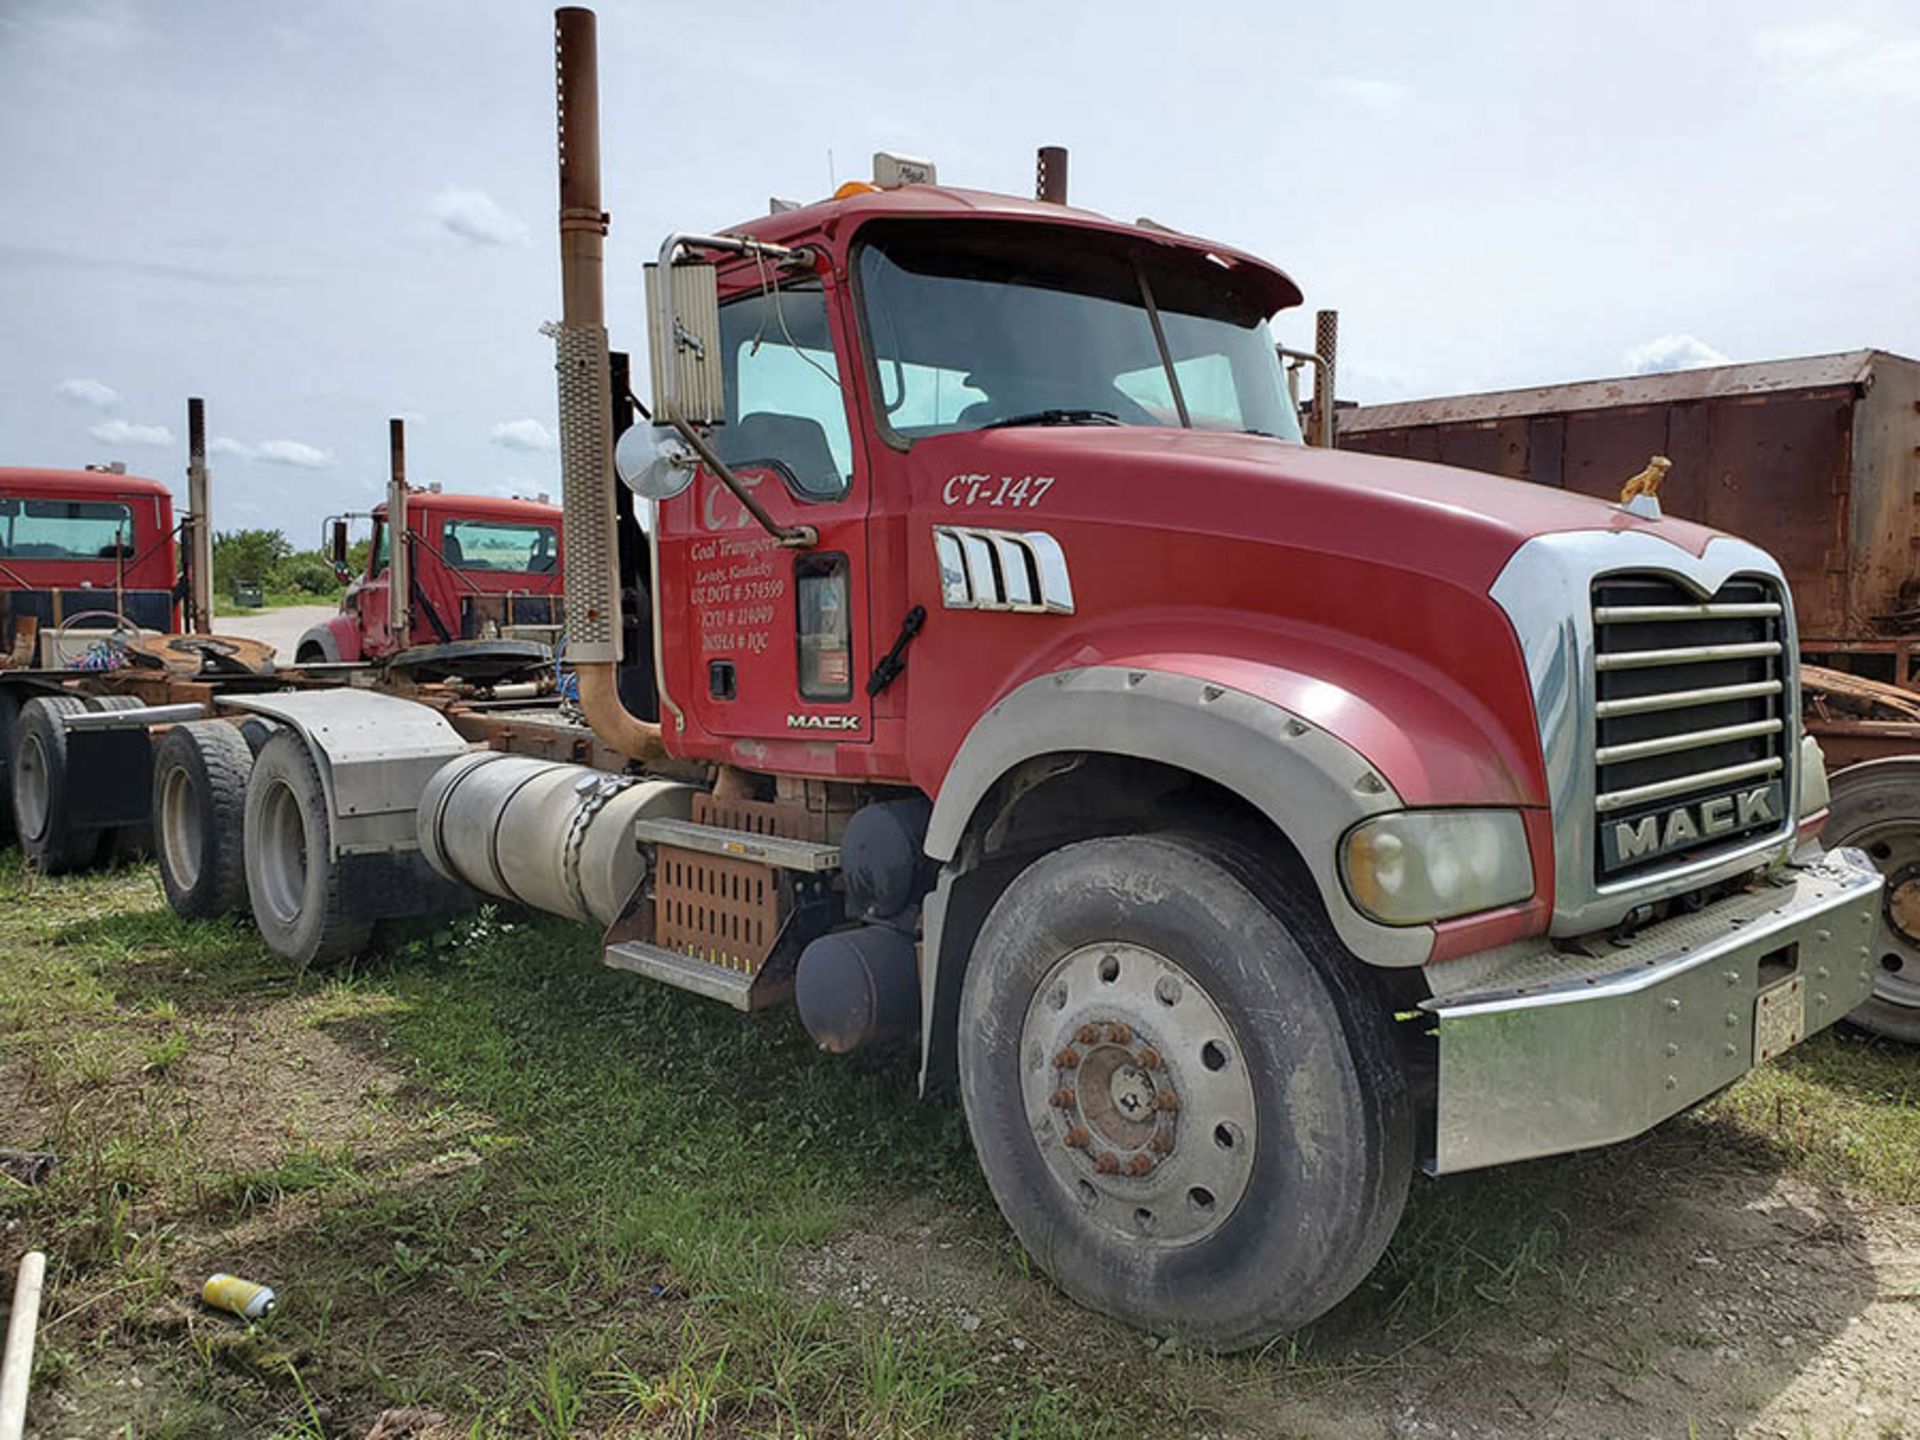 2009 MACK GU713 T/A DAY CAB TRACTOR, MAXITORQUE 18 SPEED TRANS., WET LINES MACK INLINE SIX DIESEL - Image 3 of 12